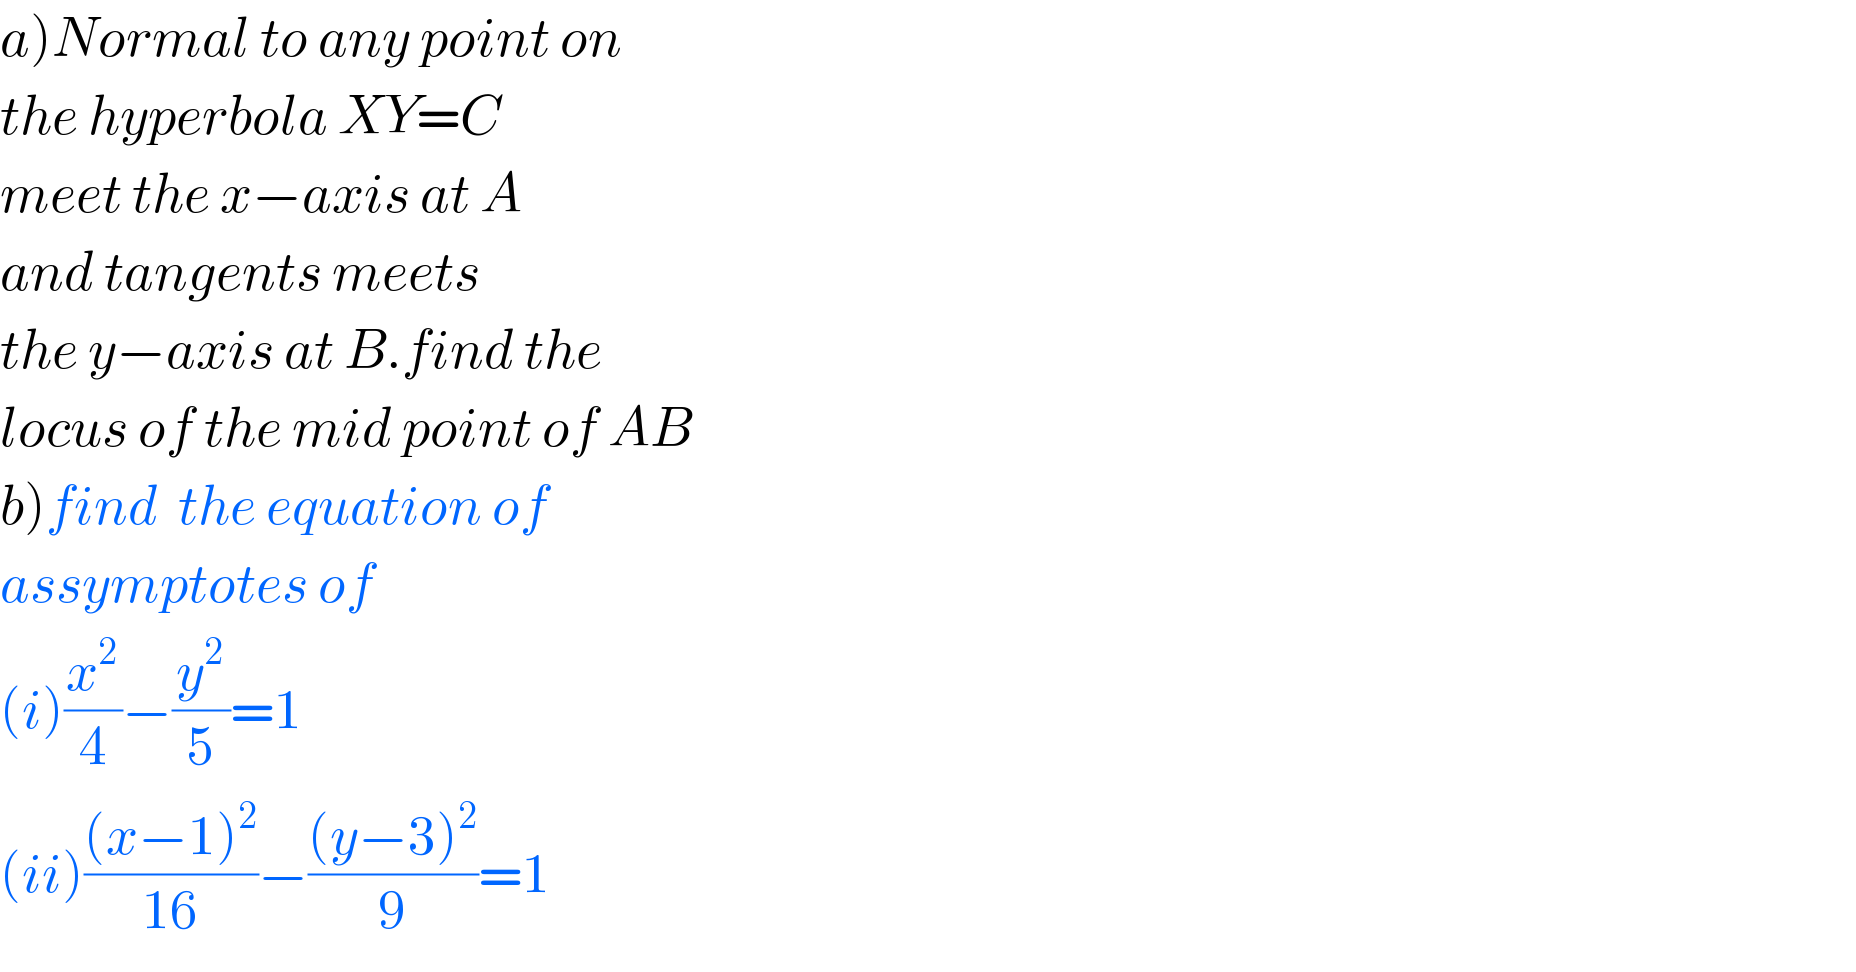 a)Normal to any point on  the hyperbola XY=C  meet the x−axis at A  and tangents meets  the y−axis at B.find the  locus of the mid point of AB  b)find  the equation of   assymptotes of  (i)(x^2 /4)−(y^2 /5)=1  (ii)(((x−1)^2 )/(16))−(((y−3)^2 )/9)=1  